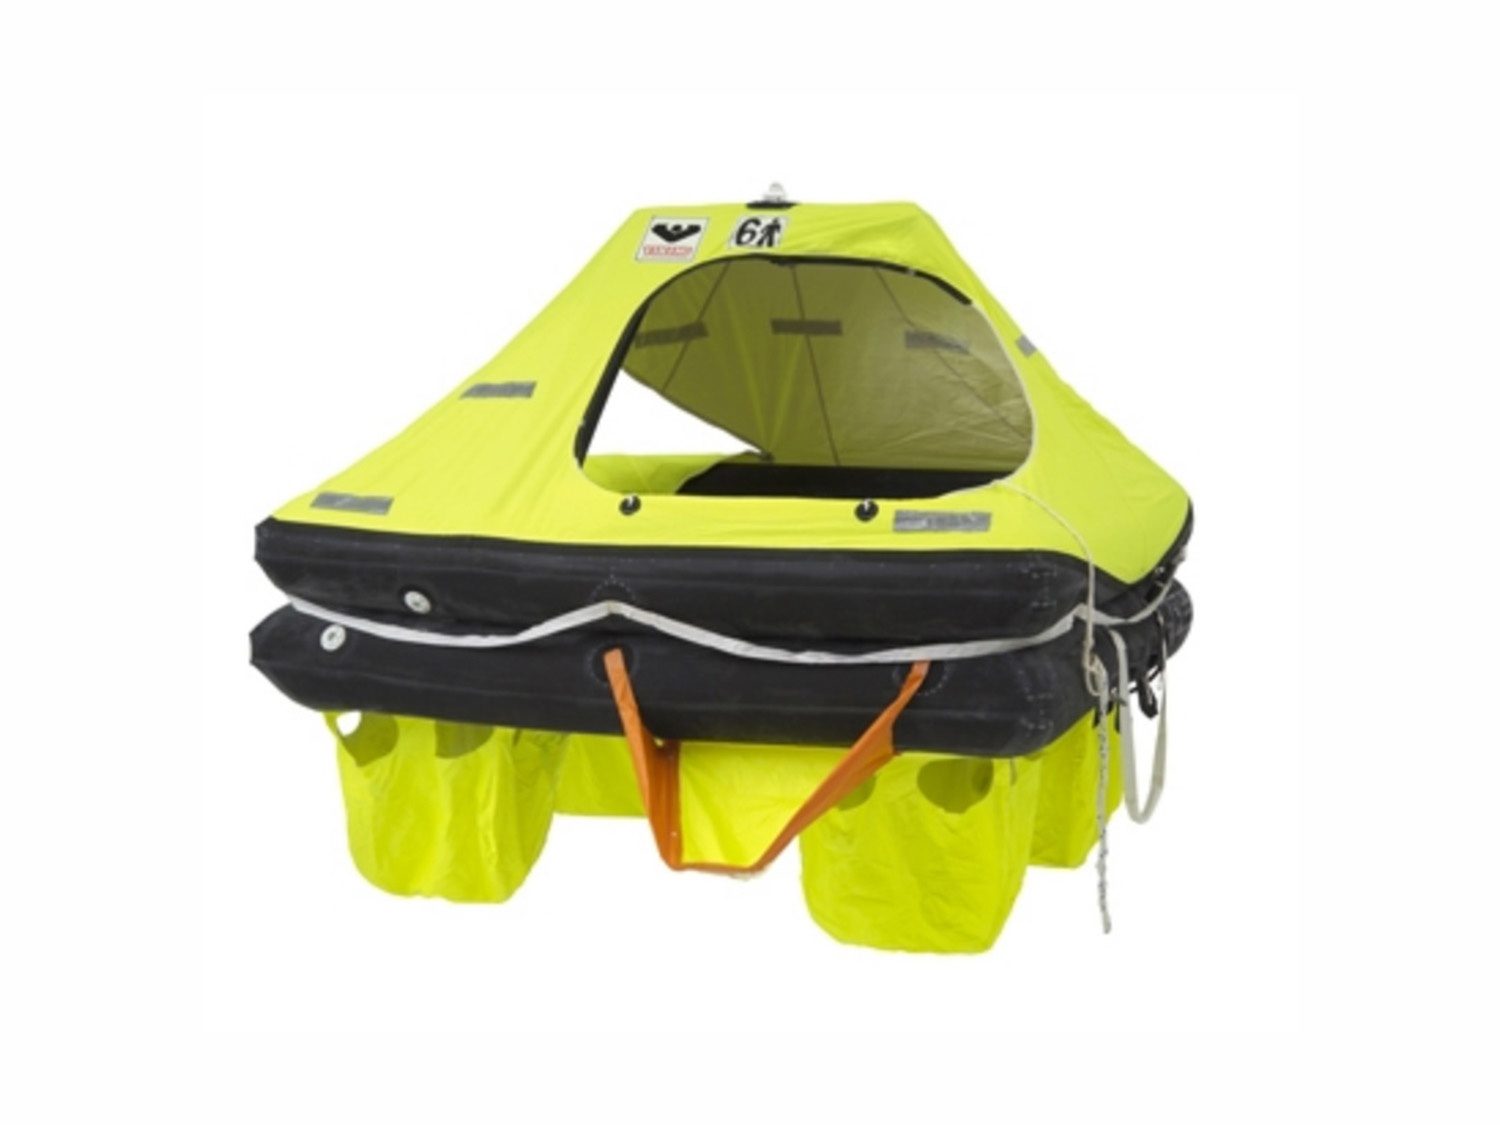 Example of a life raft